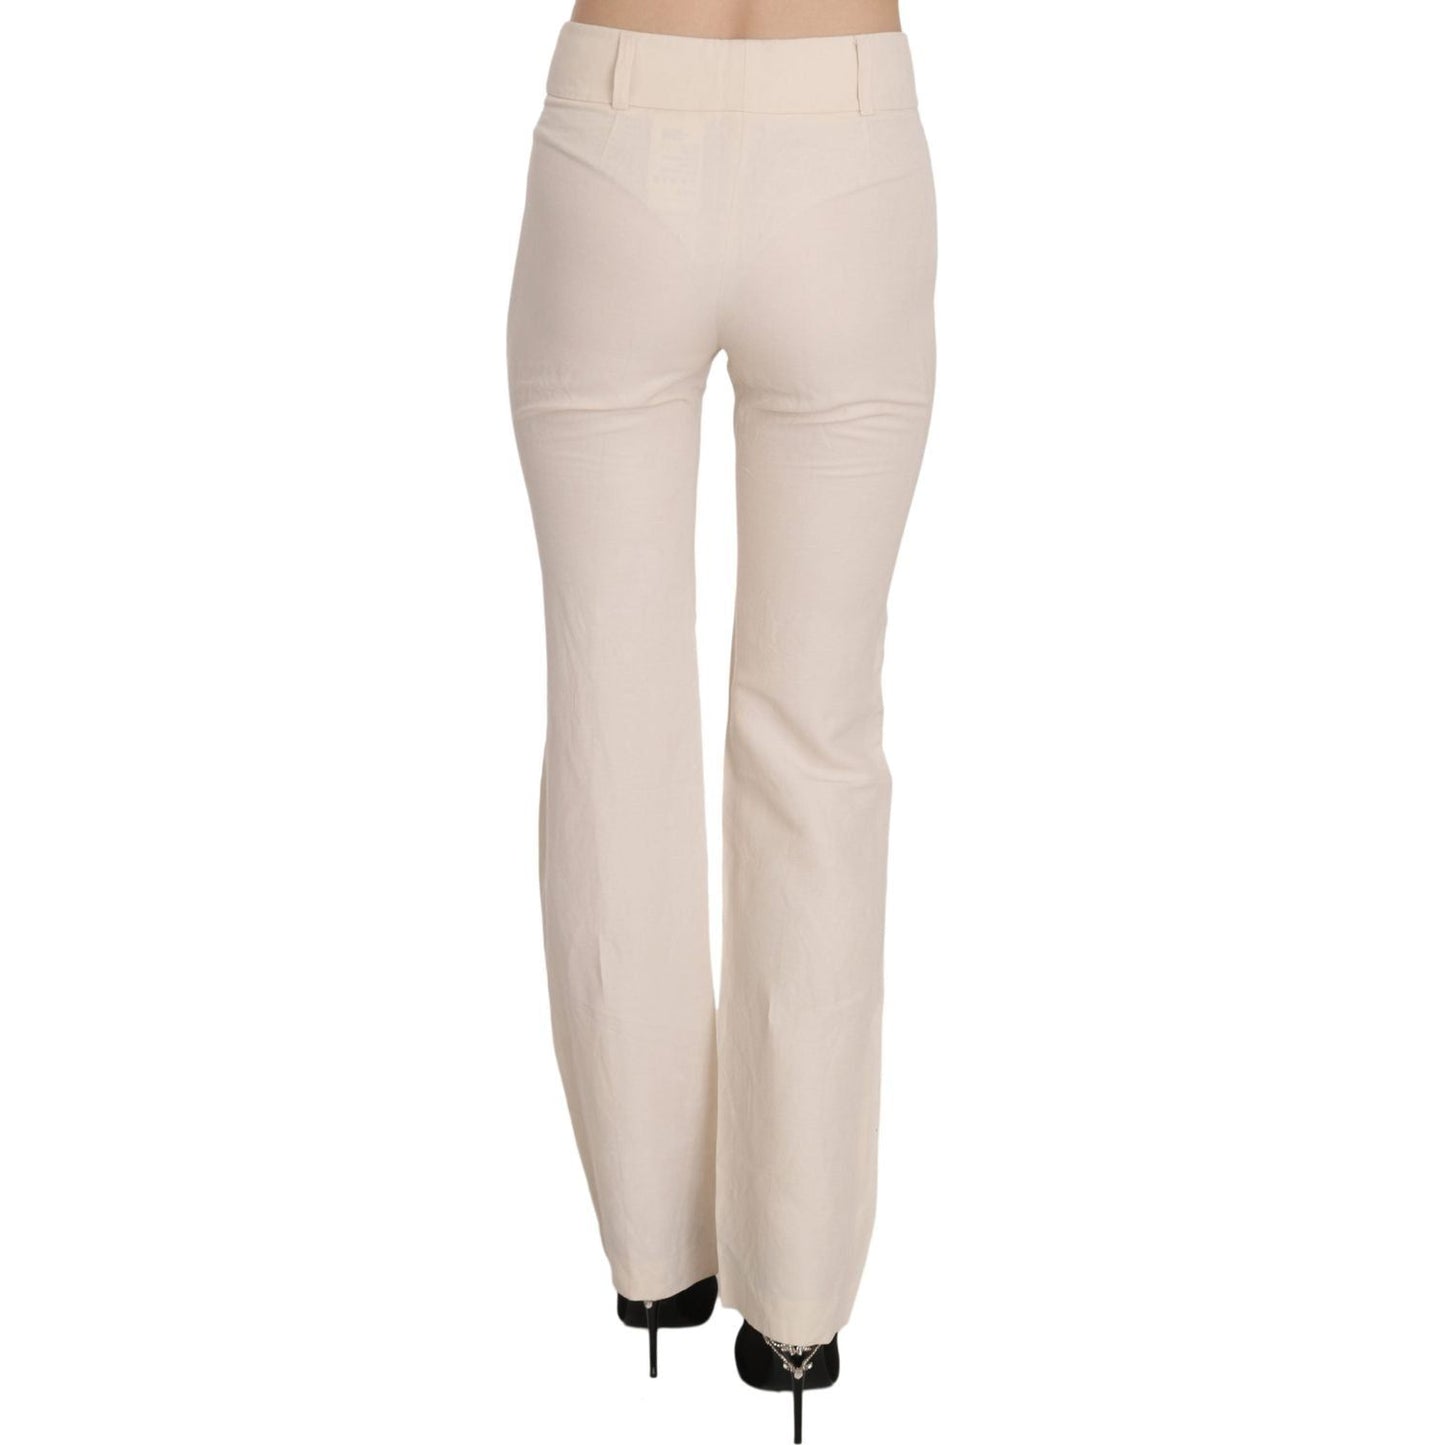 LAUREL Elevated White High Waist Flared Trousers white-high-waist-silk-blend-flared-dress-trousers-pants